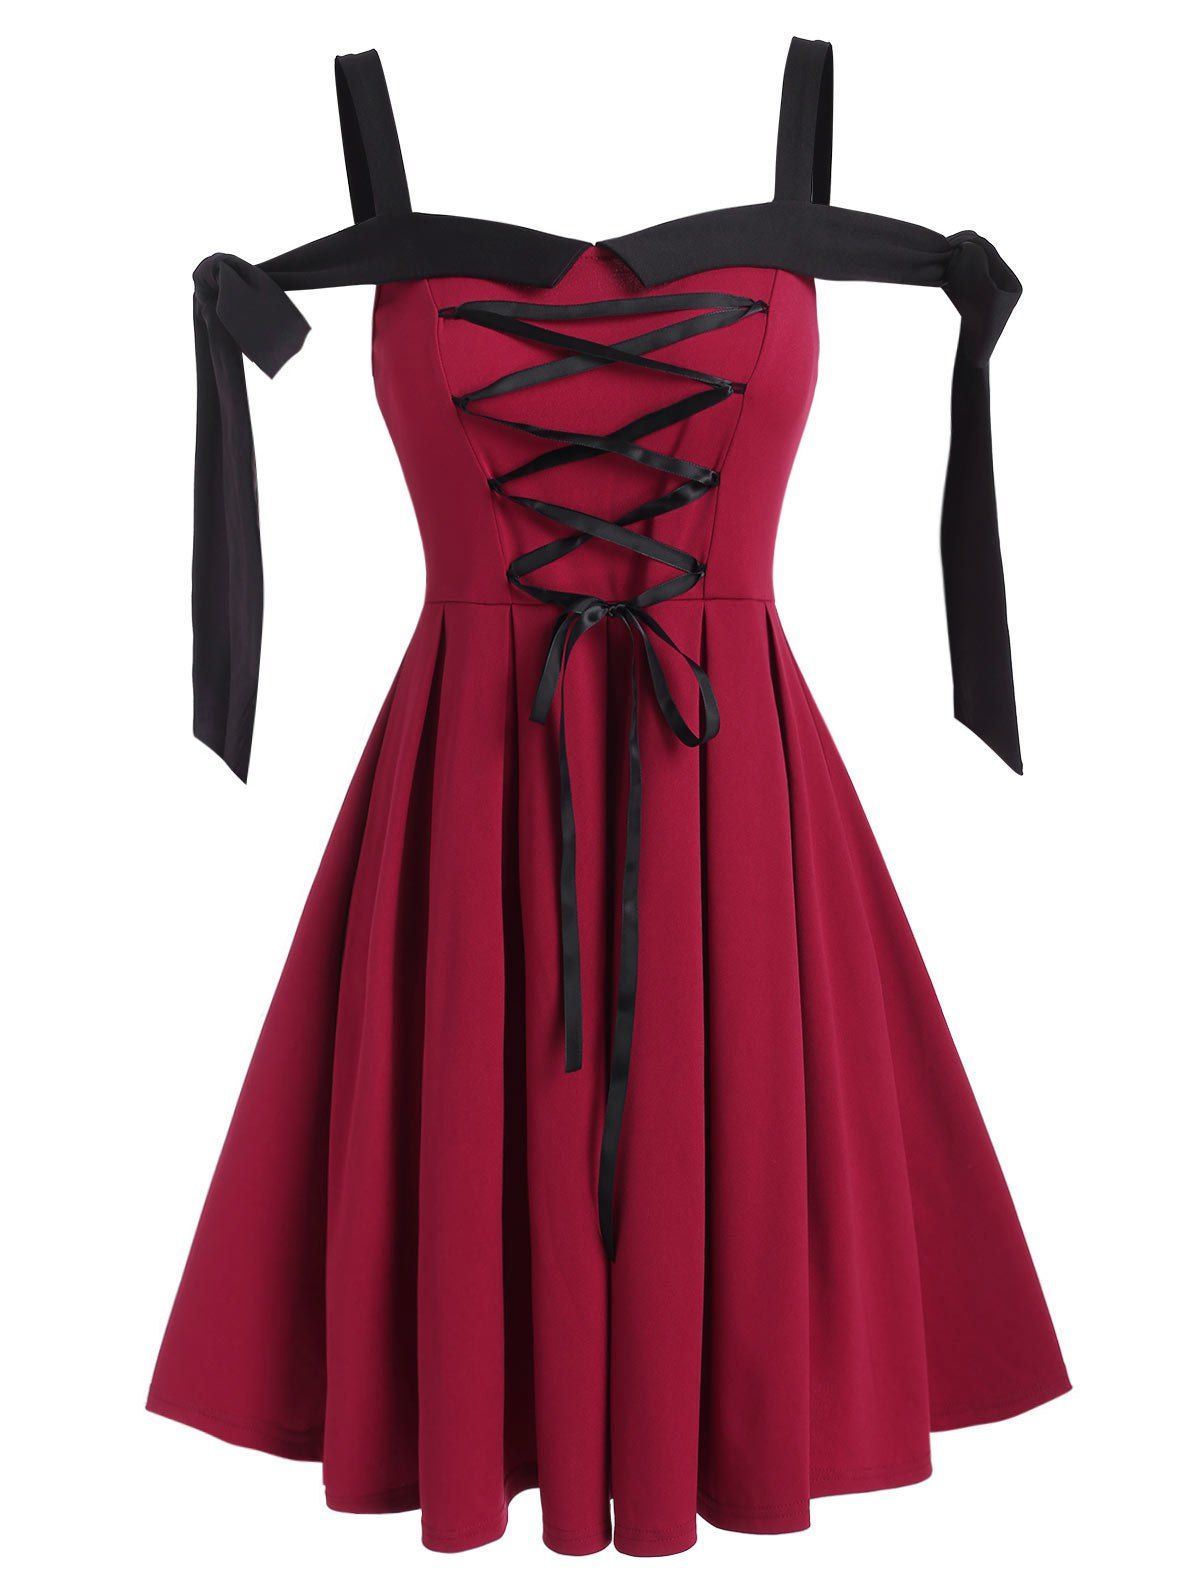 Cold Shoulder Knot Lace-up Front Pleated Dress - RED WINE M